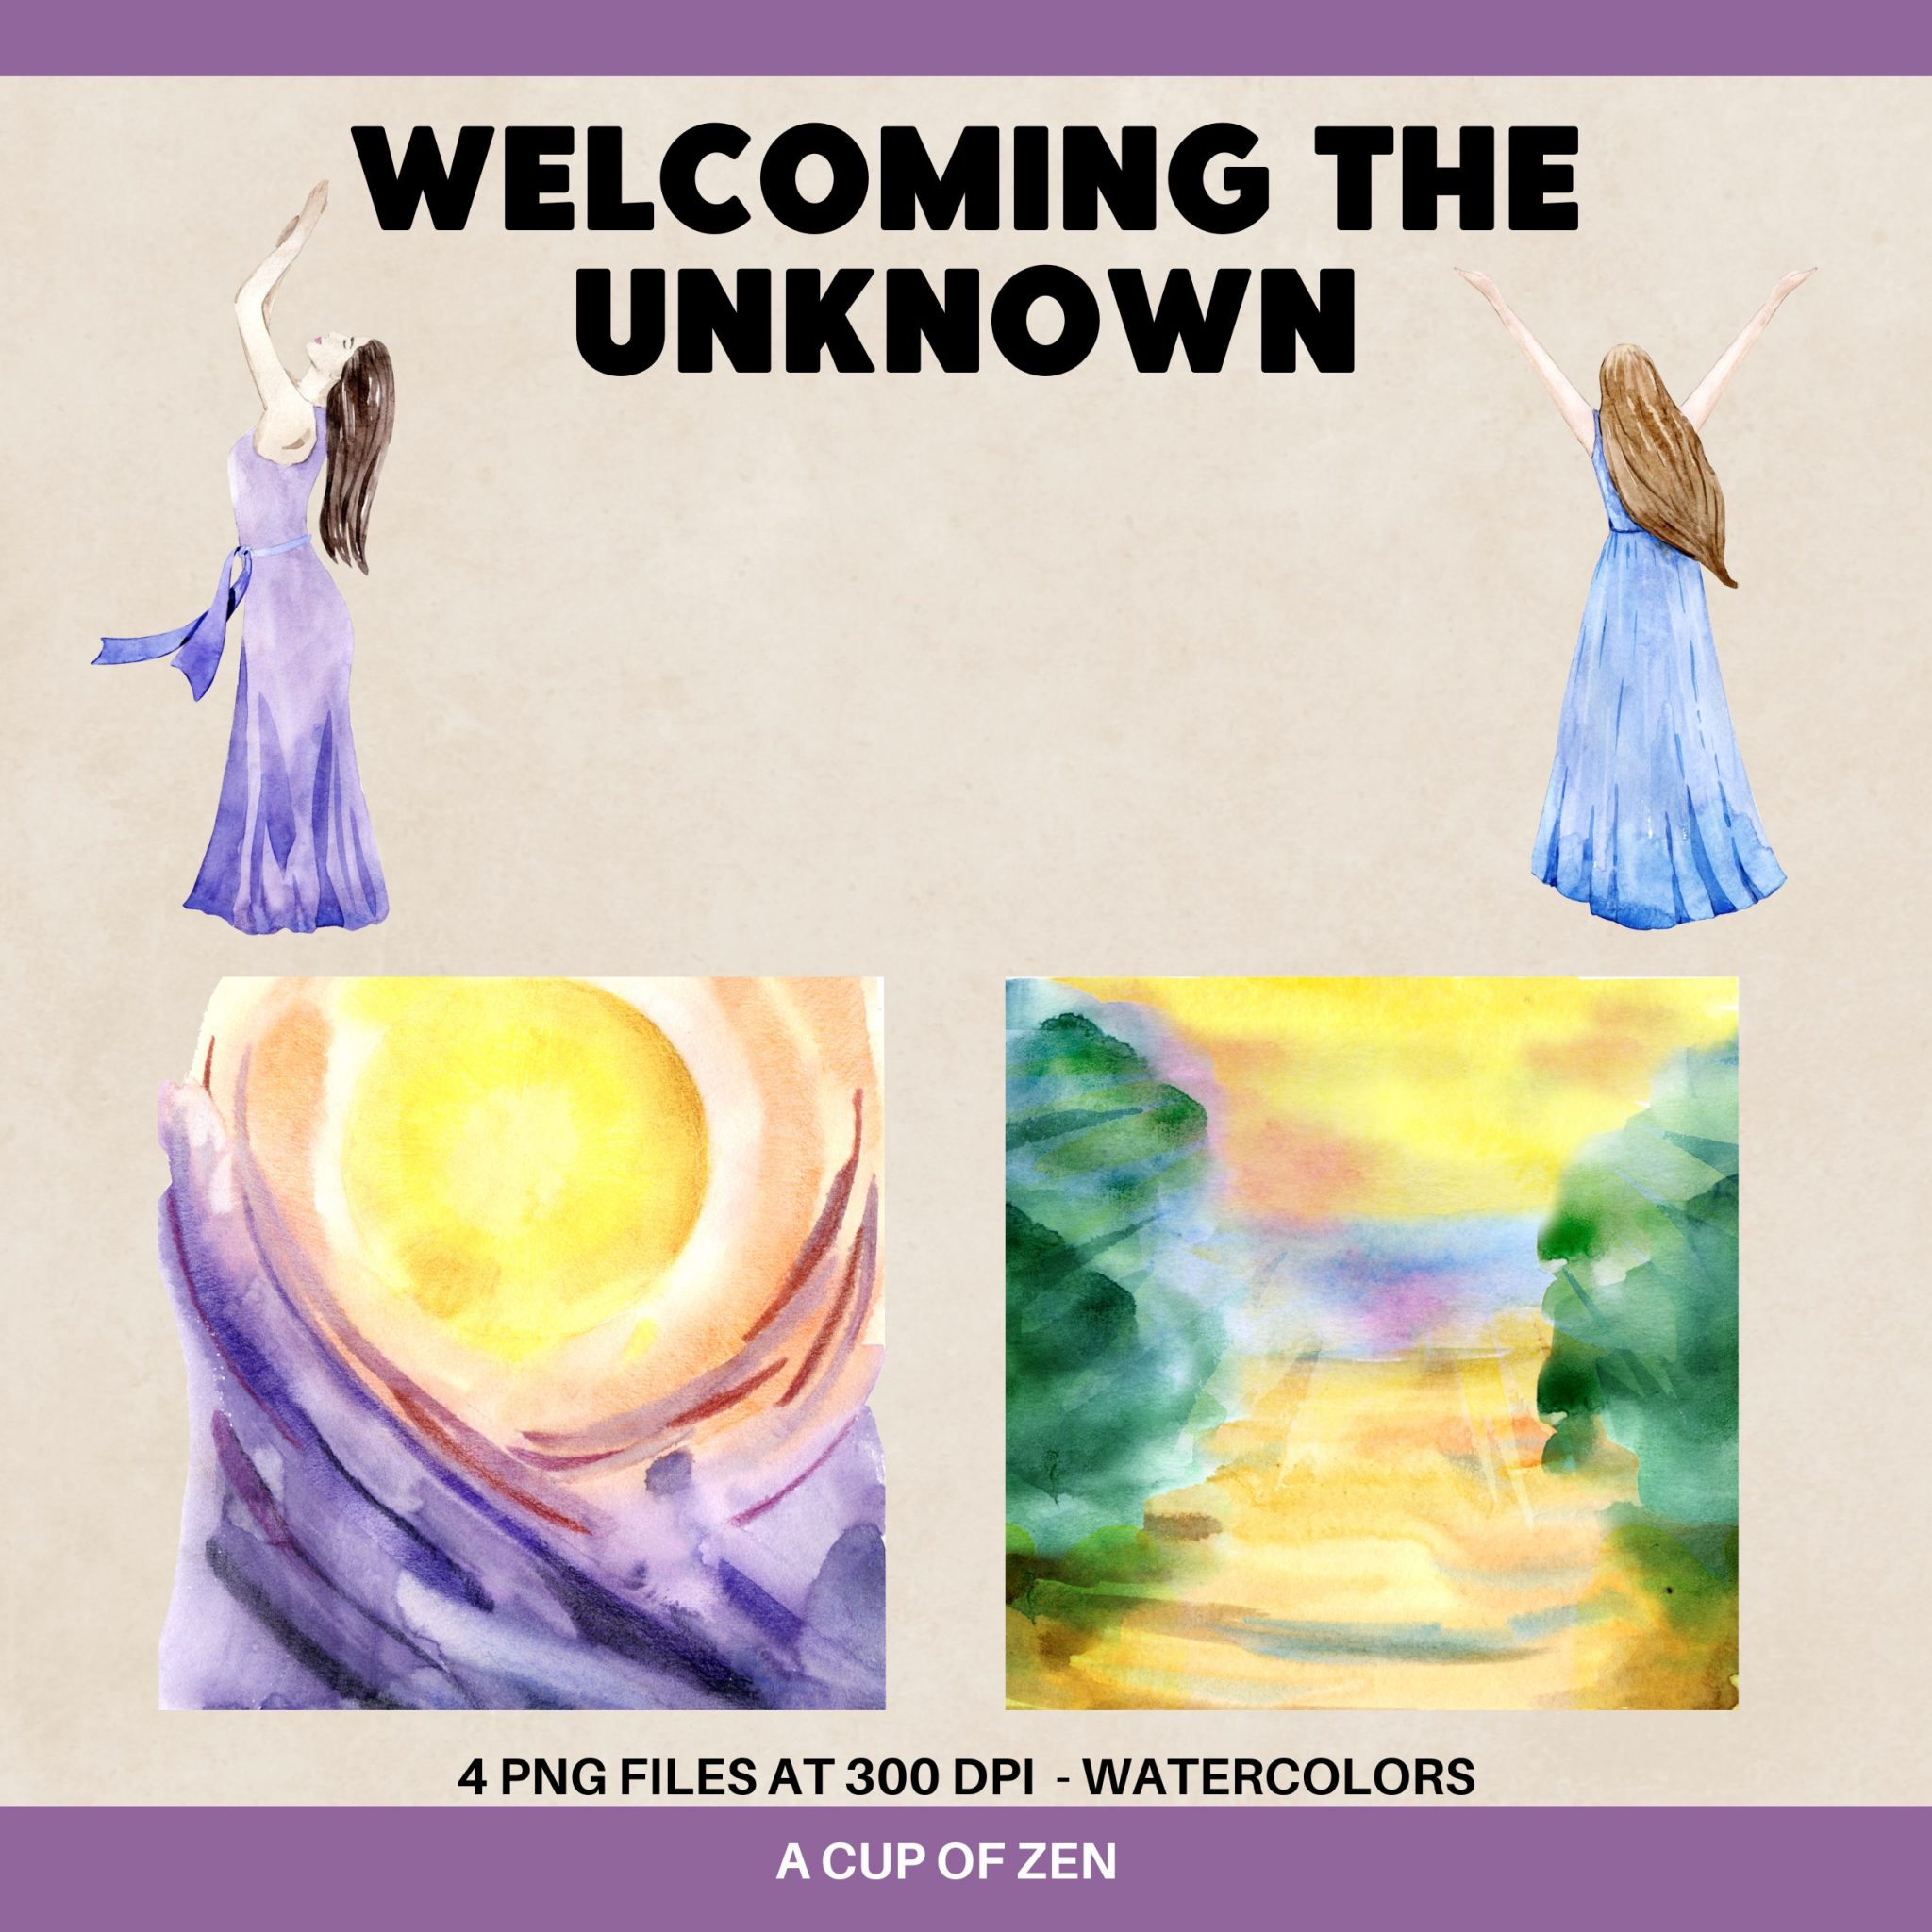 WELCOMING THE UNKNOWN